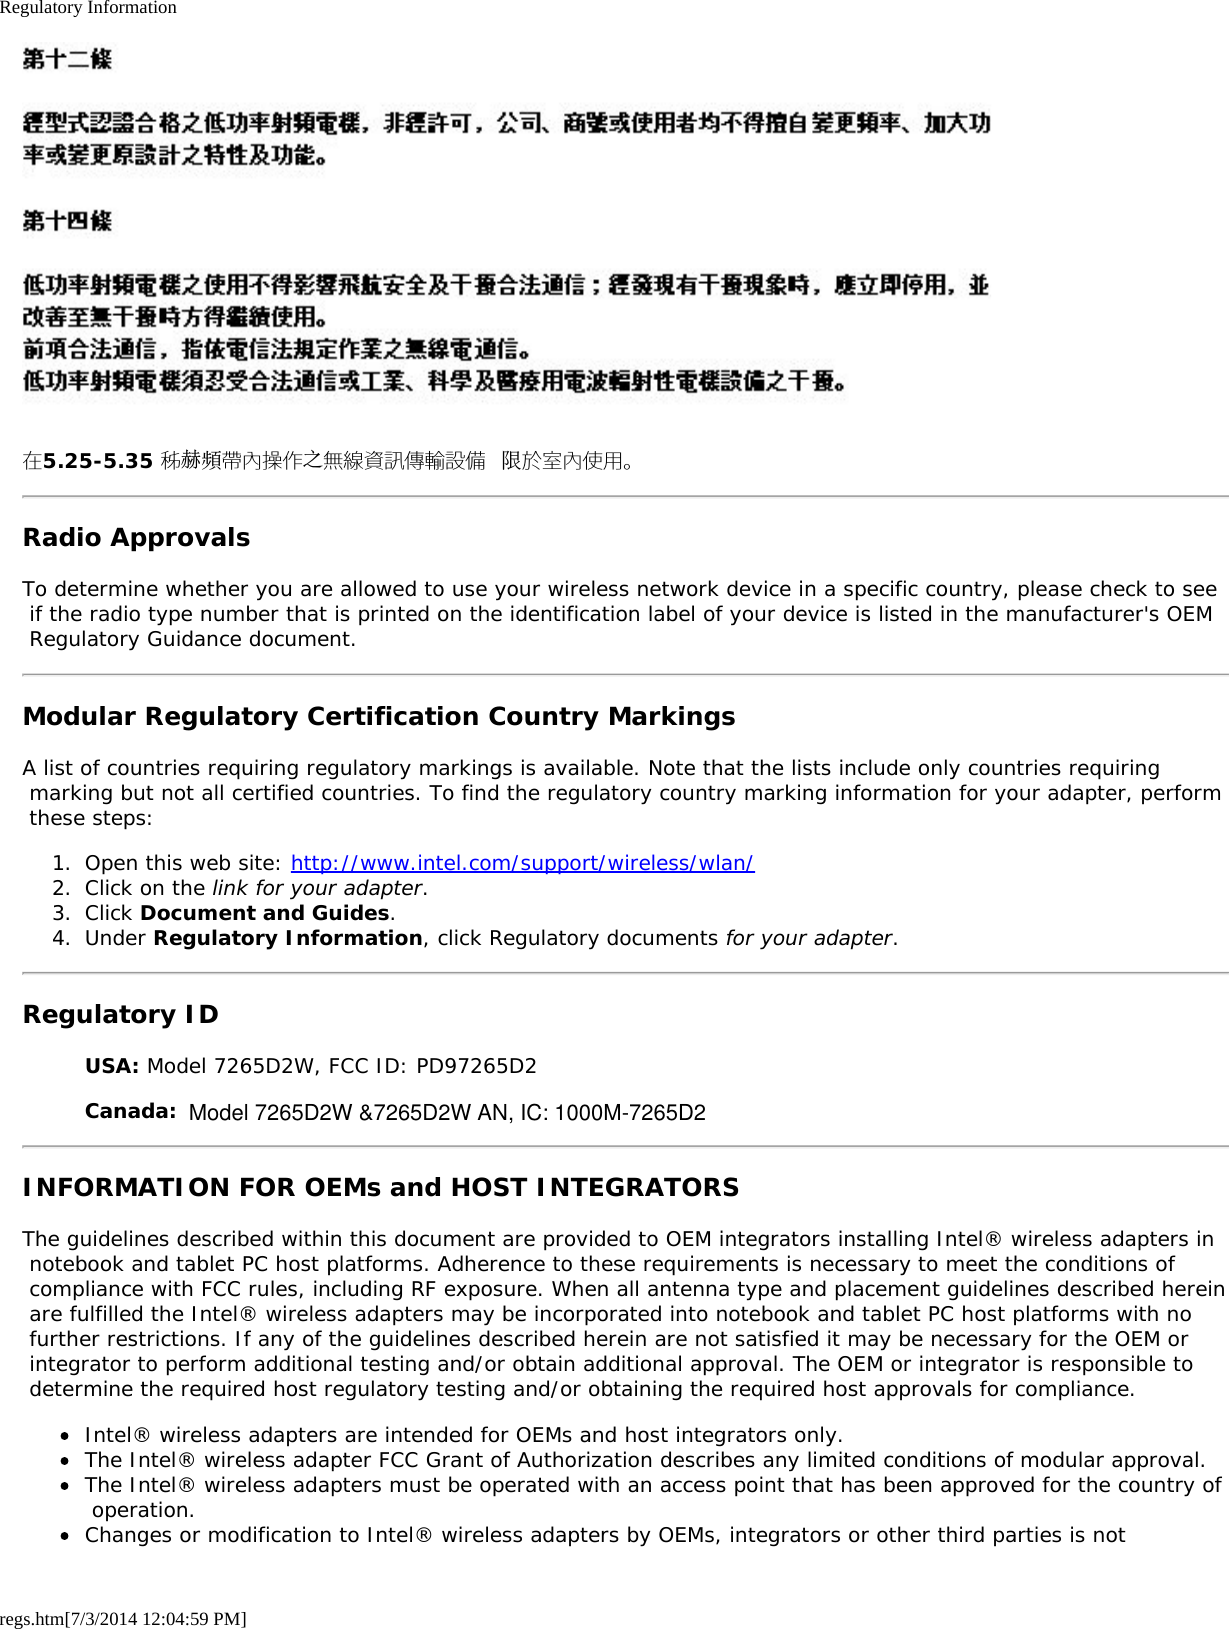 Regulatory Informationregs.htm[7/3/2014 12:04:59 PM]在5.25-5.35 秭赫頻帶內操作之無線資訊傳輸設備 限於室內使用。Radio ApprovalsTo determine whether you are allowed to use your wireless network device in a specific country, please check to see if the radio type number that is printed on the identification label of your device is listed in the manufacturer&apos;s OEM Regulatory Guidance document.Modular Regulatory Certification Country MarkingsA list of countries requiring regulatory markings is available. Note that the lists include only countries requiring marking but not all certified countries. To find the regulatory country marking information for your adapter, perform these steps:1.  Open this web site: http://www.intel.com/support/wireless/wlan/2.  Click on the link for your adapter.3.  Click Document and Guides.4.  Under Regulatory Information, click Regulatory documents for your adapter.Regulatory IDUSA: Model 7265D2W, FCC ID: PD97265D2Canada: Model 7265D2W, IC: 1000M-7265D2INFORMATION FOR OEMs and HOST INTEGRATORSThe guidelines described within this document are provided to OEM integrators installing Intel® wireless adapters in notebook and tablet PC host platforms. Adherence to these requirements is necessary to meet the conditions of compliance with FCC rules, including RF exposure. When all antenna type and placement guidelines described herein are fulfilled the Intel® wireless adapters may be incorporated into notebook and tablet PC host platforms with no further restrictions. If any of the guidelines described herein are not satisfied it may be necessary for the OEM or integrator to perform additional testing and/or obtain additional approval. The OEM or integrator is responsible to determine the required host regulatory testing and/or obtaining the required host approvals for compliance.Intel® wireless adapters are intended for OEMs and host integrators only.The Intel® wireless adapter FCC Grant of Authorization describes any limited conditions of modular approval.The Intel® wireless adapters must be operated with an access point that has been approved for the country of operation.Changes or modification to Intel® wireless adapters by OEMs, integrators or other third parties is notModel 7265D2W &amp;7265D2W AN, IC: 1000M-7265D2  